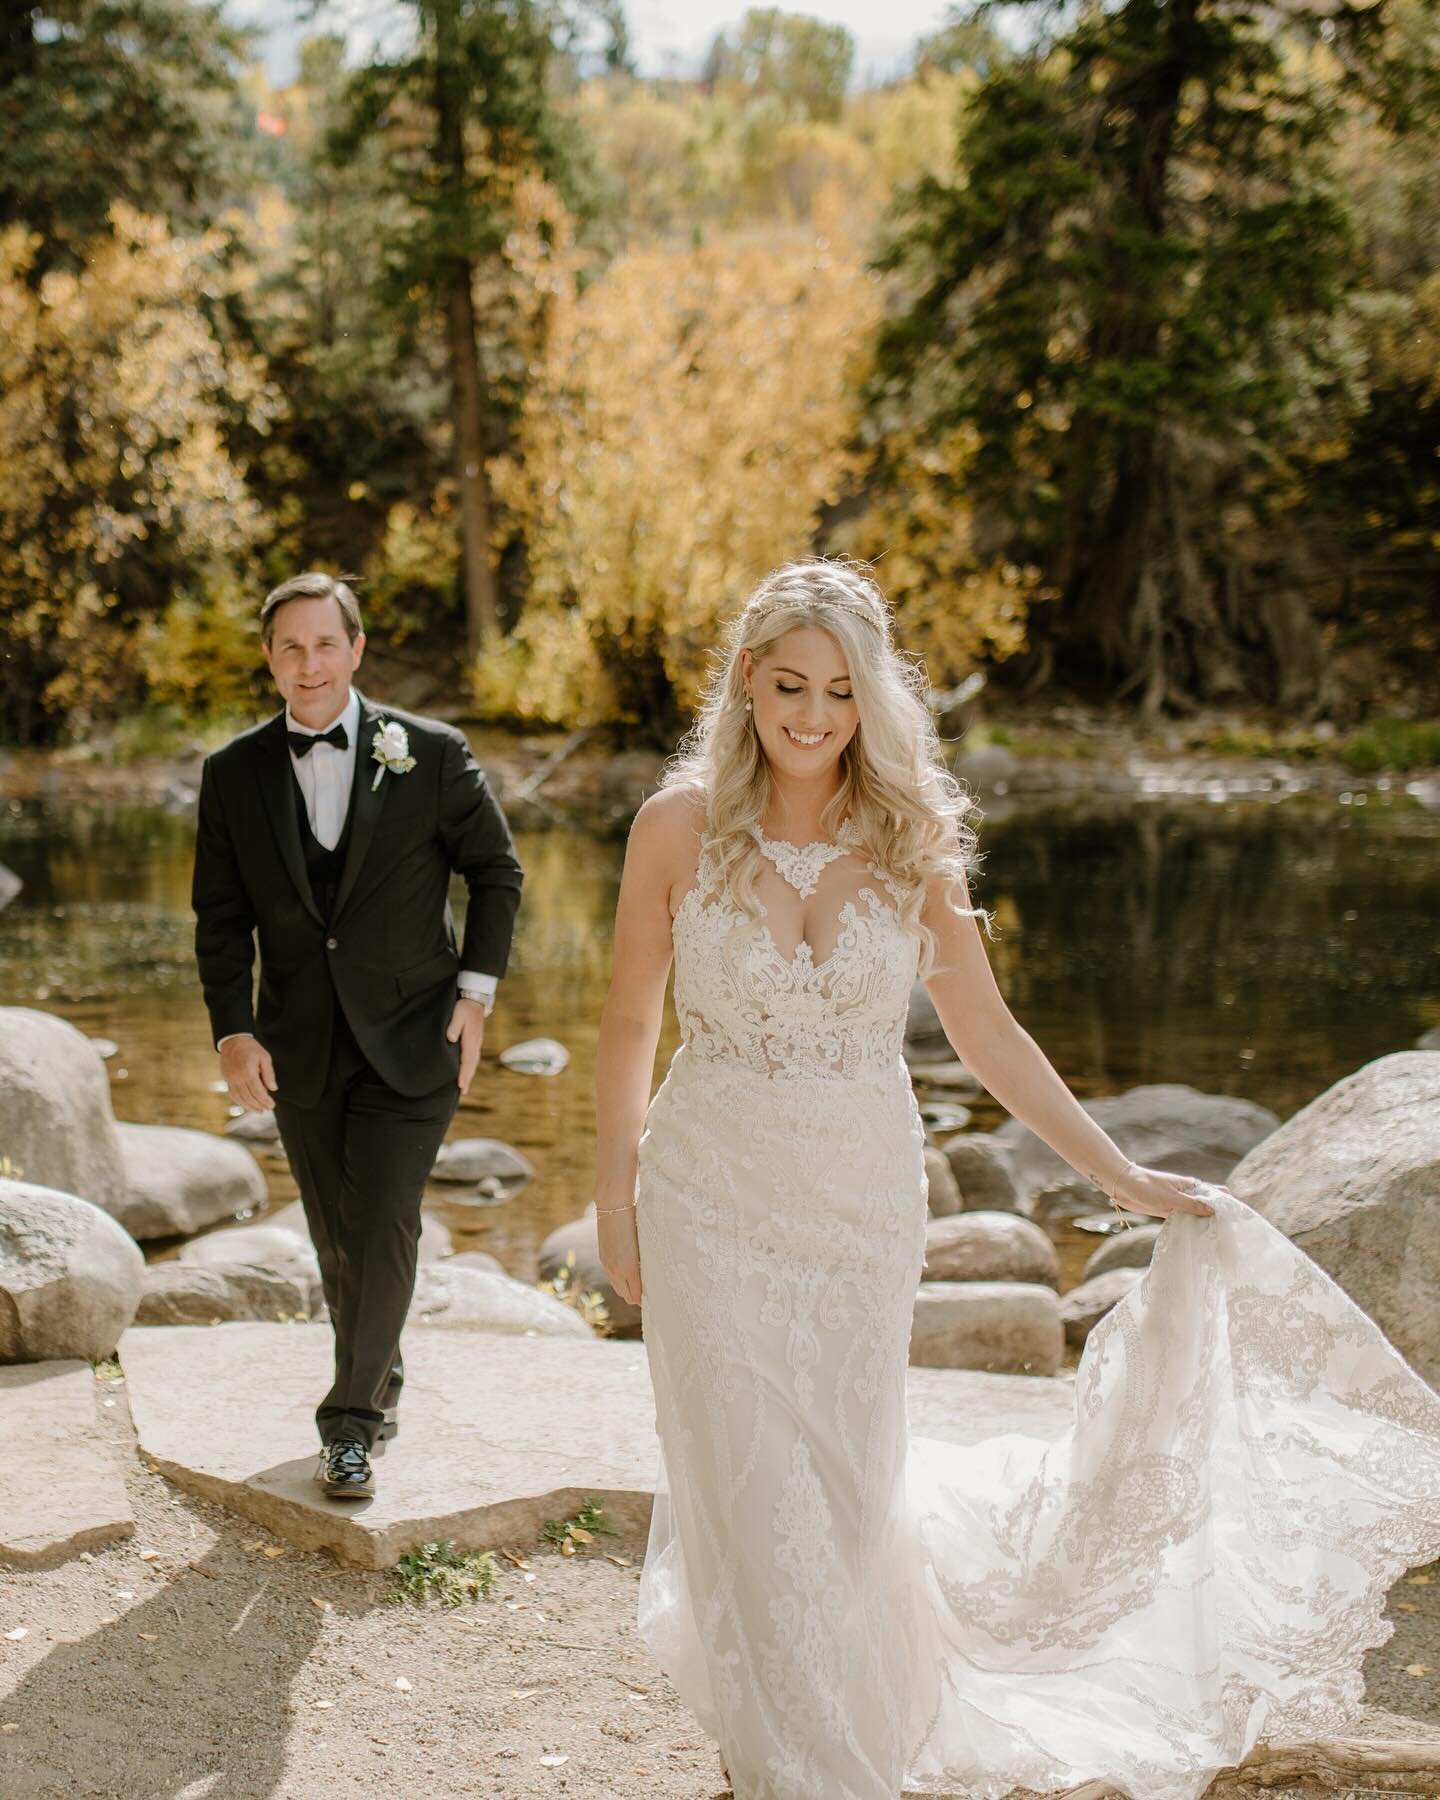 Katie and Ben&rsquo;s Westin Riverfront Wedding is live on the blog today. If you are looking for classy, fall color-filled, mountain micro wedding inspiration you&rsquo;re going to want to head on over (link in bio).

If you ask me, there&rsquo;s no